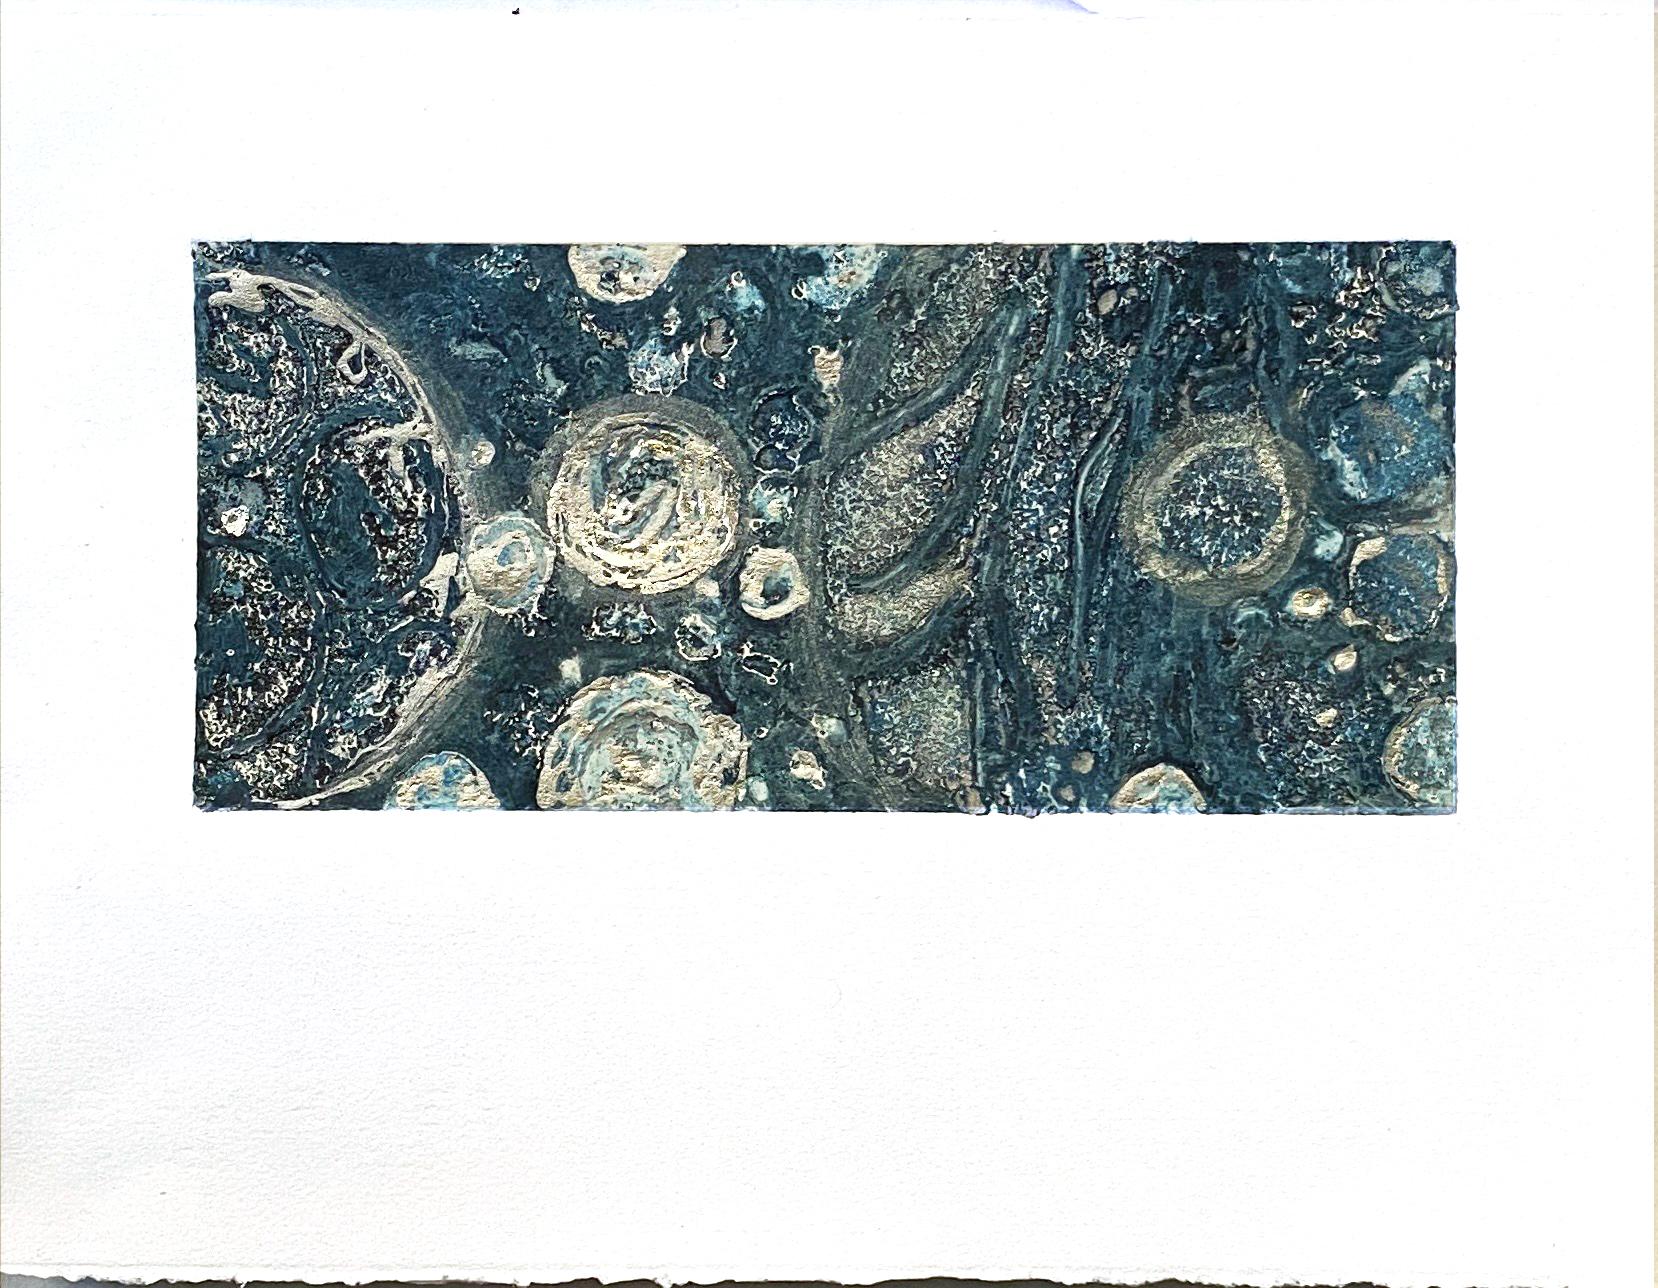 Karin Bruckner Abstract Print - ShootingStar1, collagraph print with silver leaf on paper, blue and silver